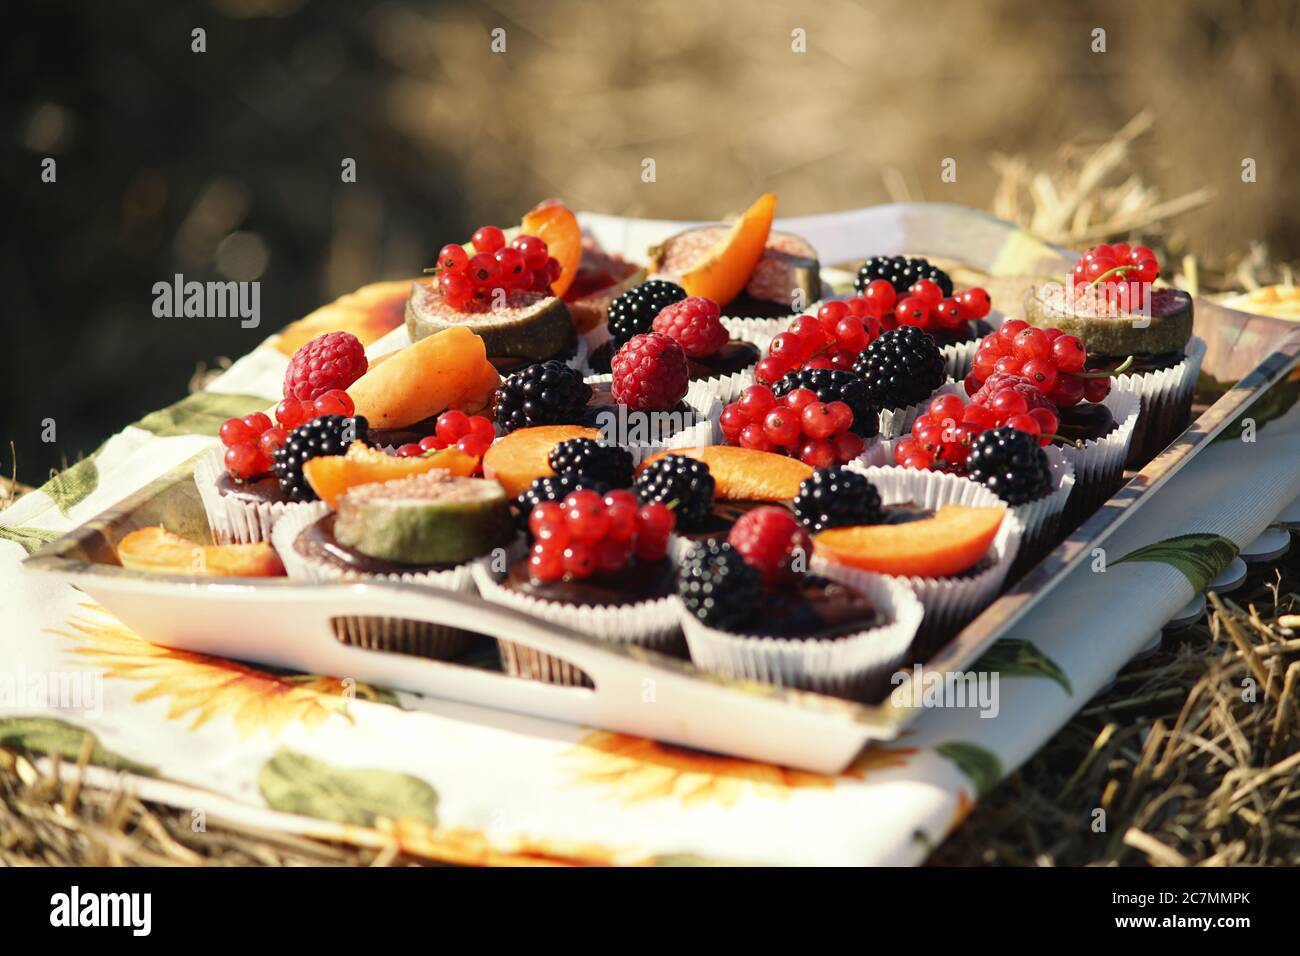 Home made chocolate muffins with organic fruit. Stock Photo